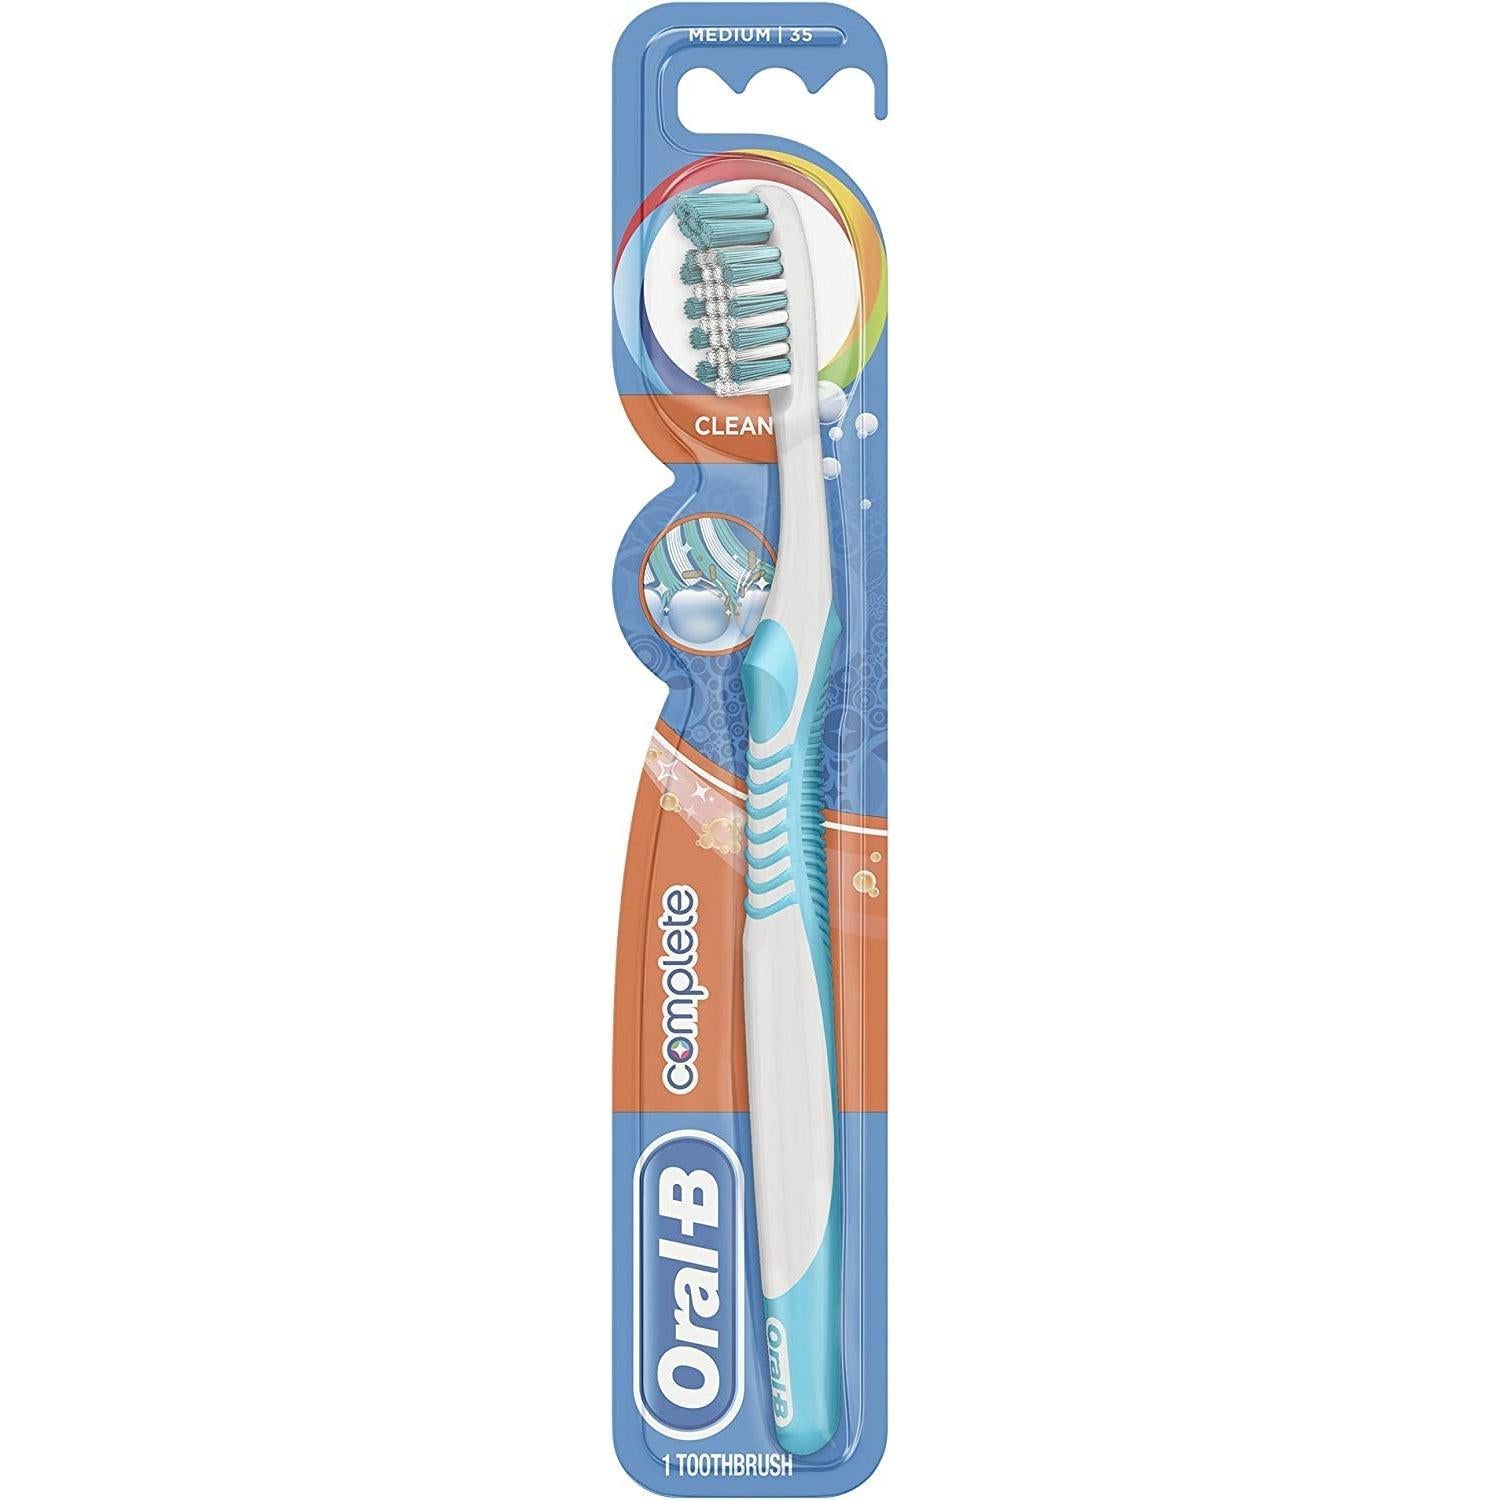 Oral-B Complete Clean Medium 35 Toothbrush - Healthxpress.ie